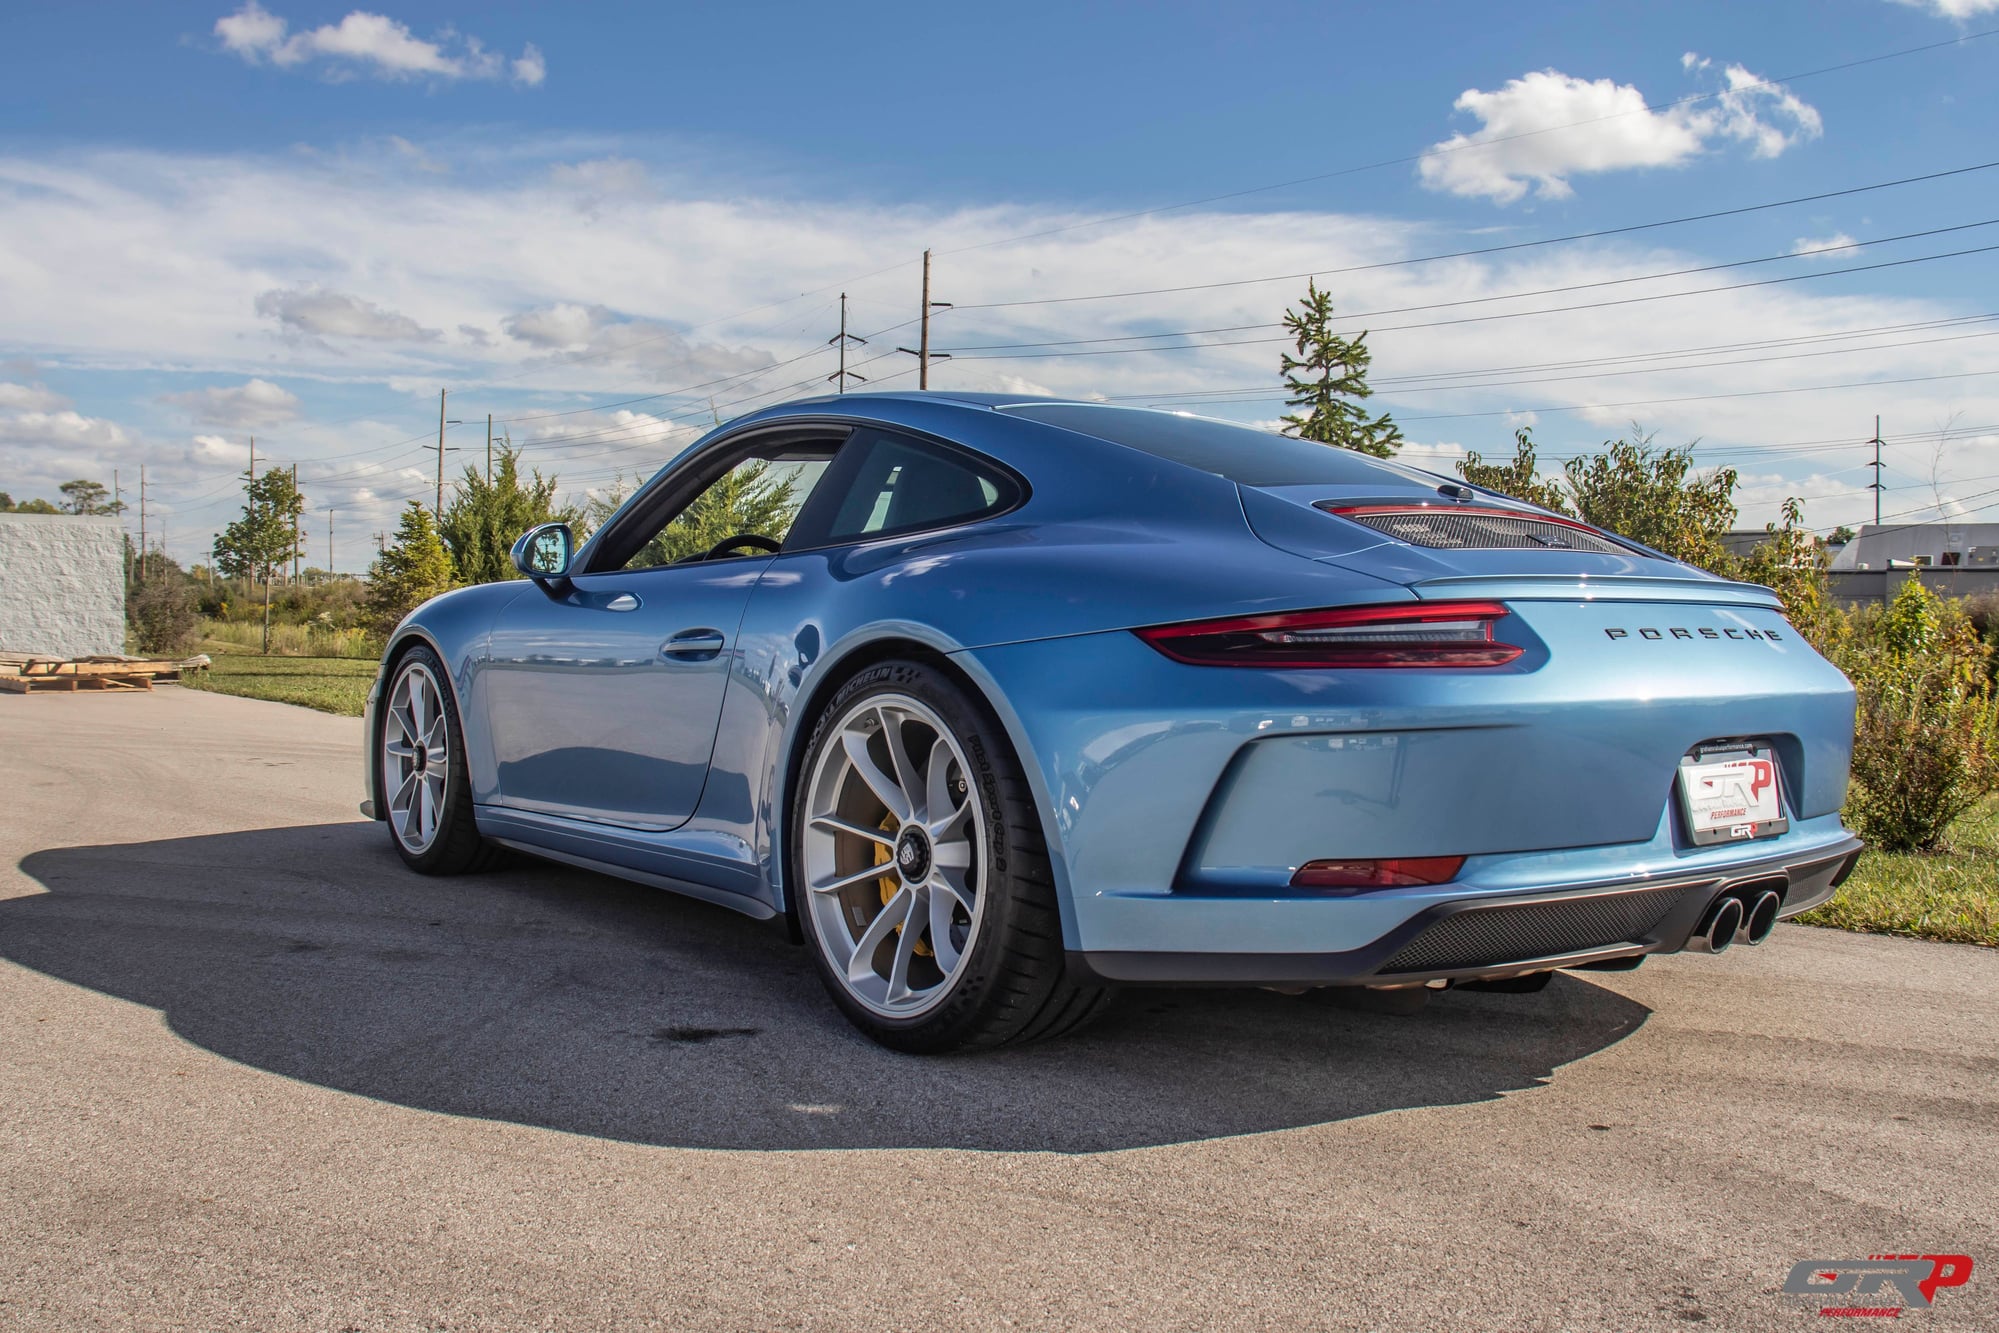 2018 Porsche 911 - 2018 Porsche GT3 Touring - PTS Gemini Blue - Used - VIN WP0AC2A97JS177204 - 5,661 Miles - 6 cyl - 2WD - Manual - Coupe - Blue - Brownsburg, IN 46112, United States